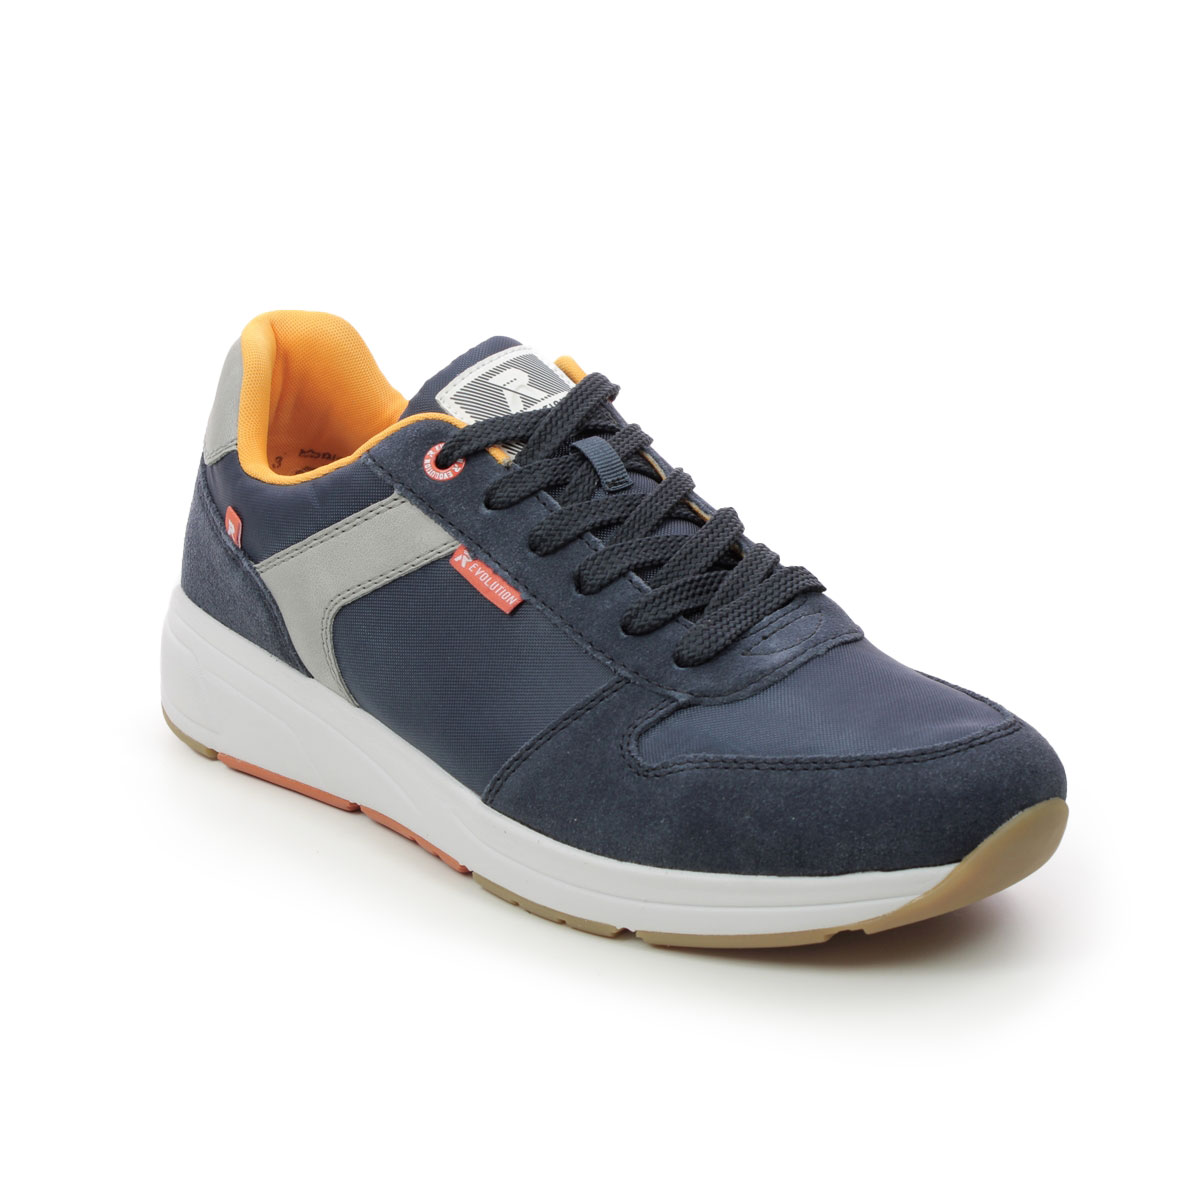 Rieker Archy Evo Navy Mens Trainers 07002-14 In Size 43 In Plain Navy